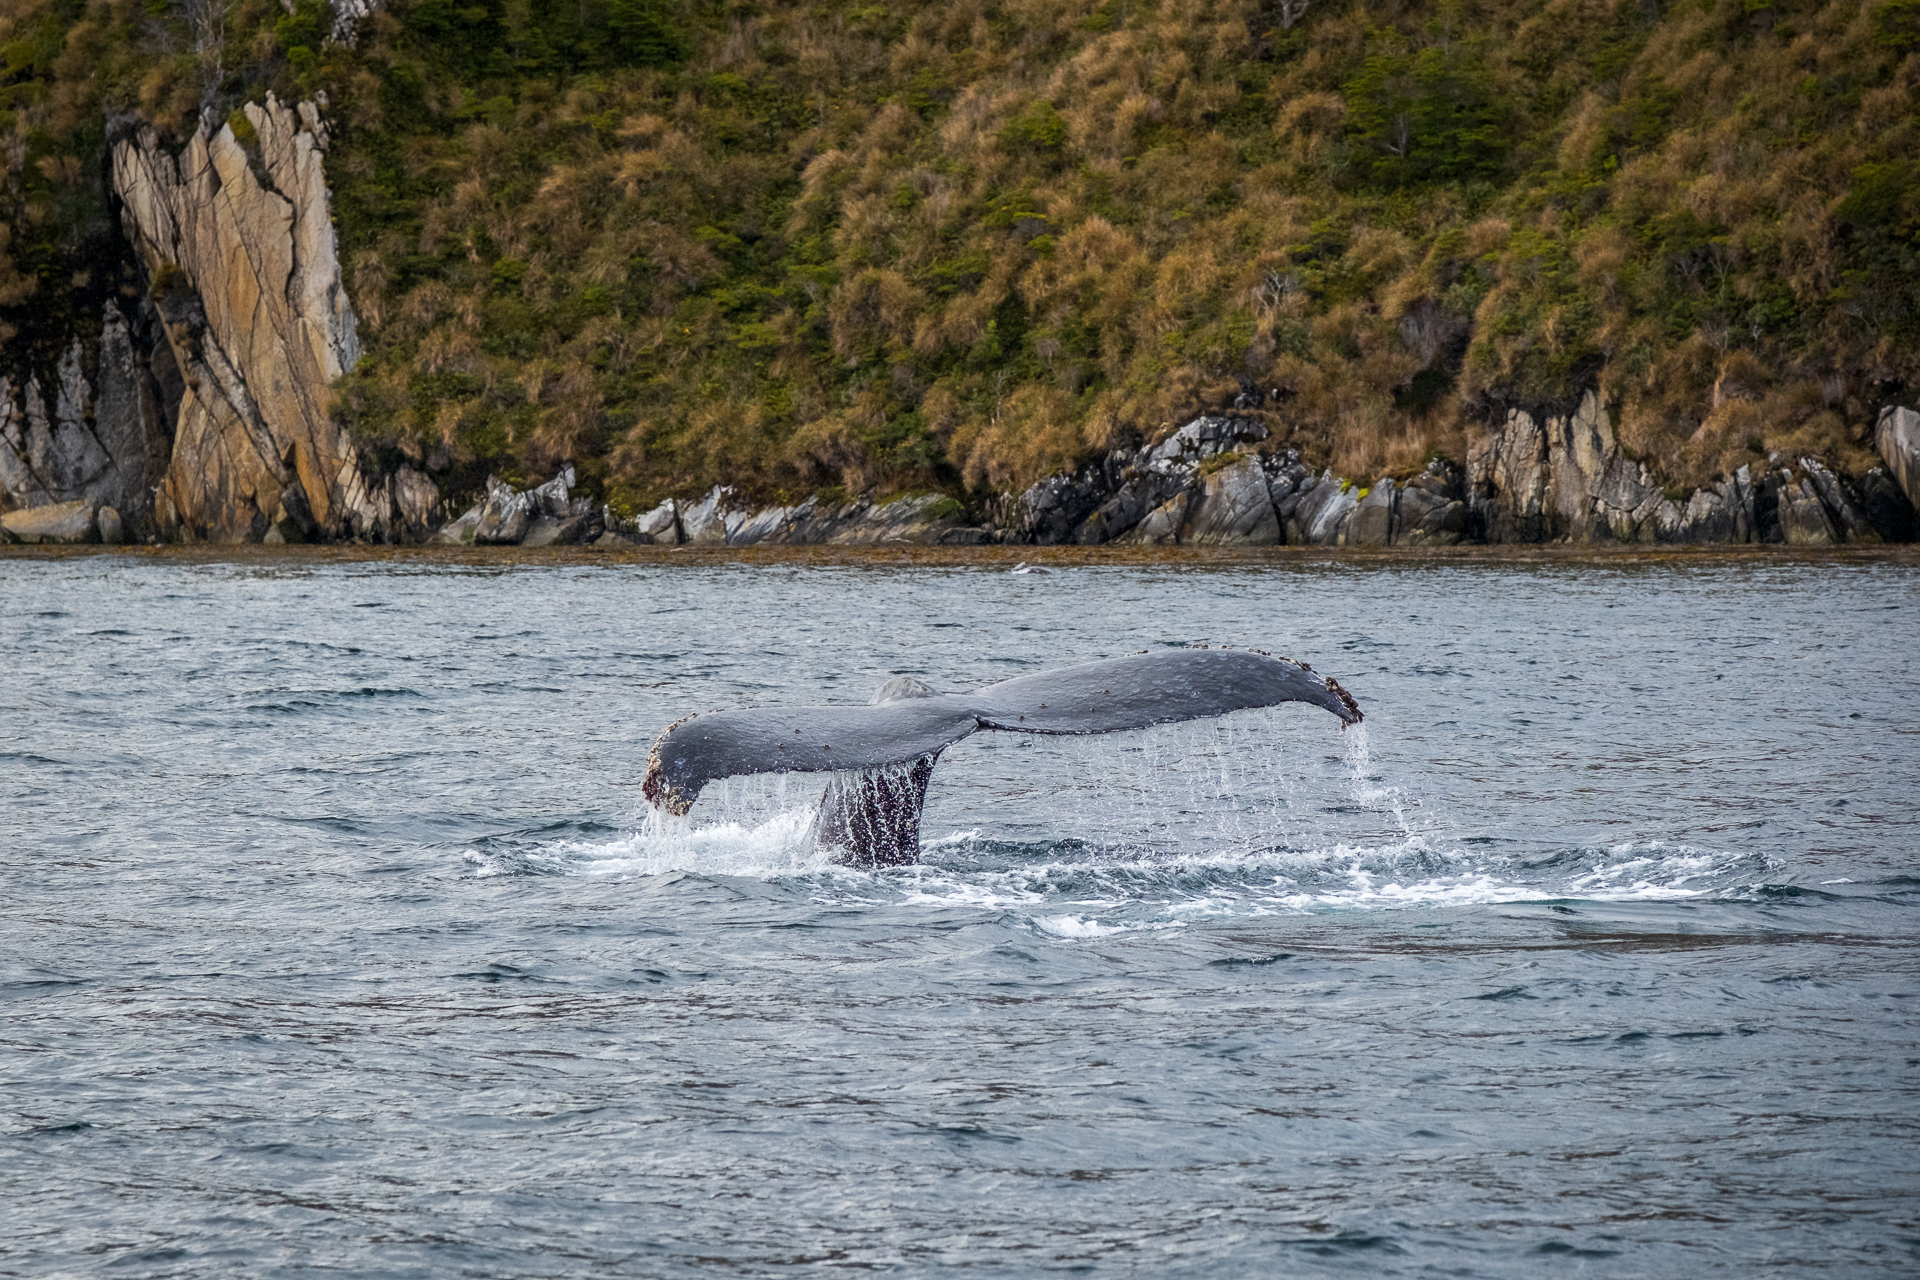 Humpback Whale diving